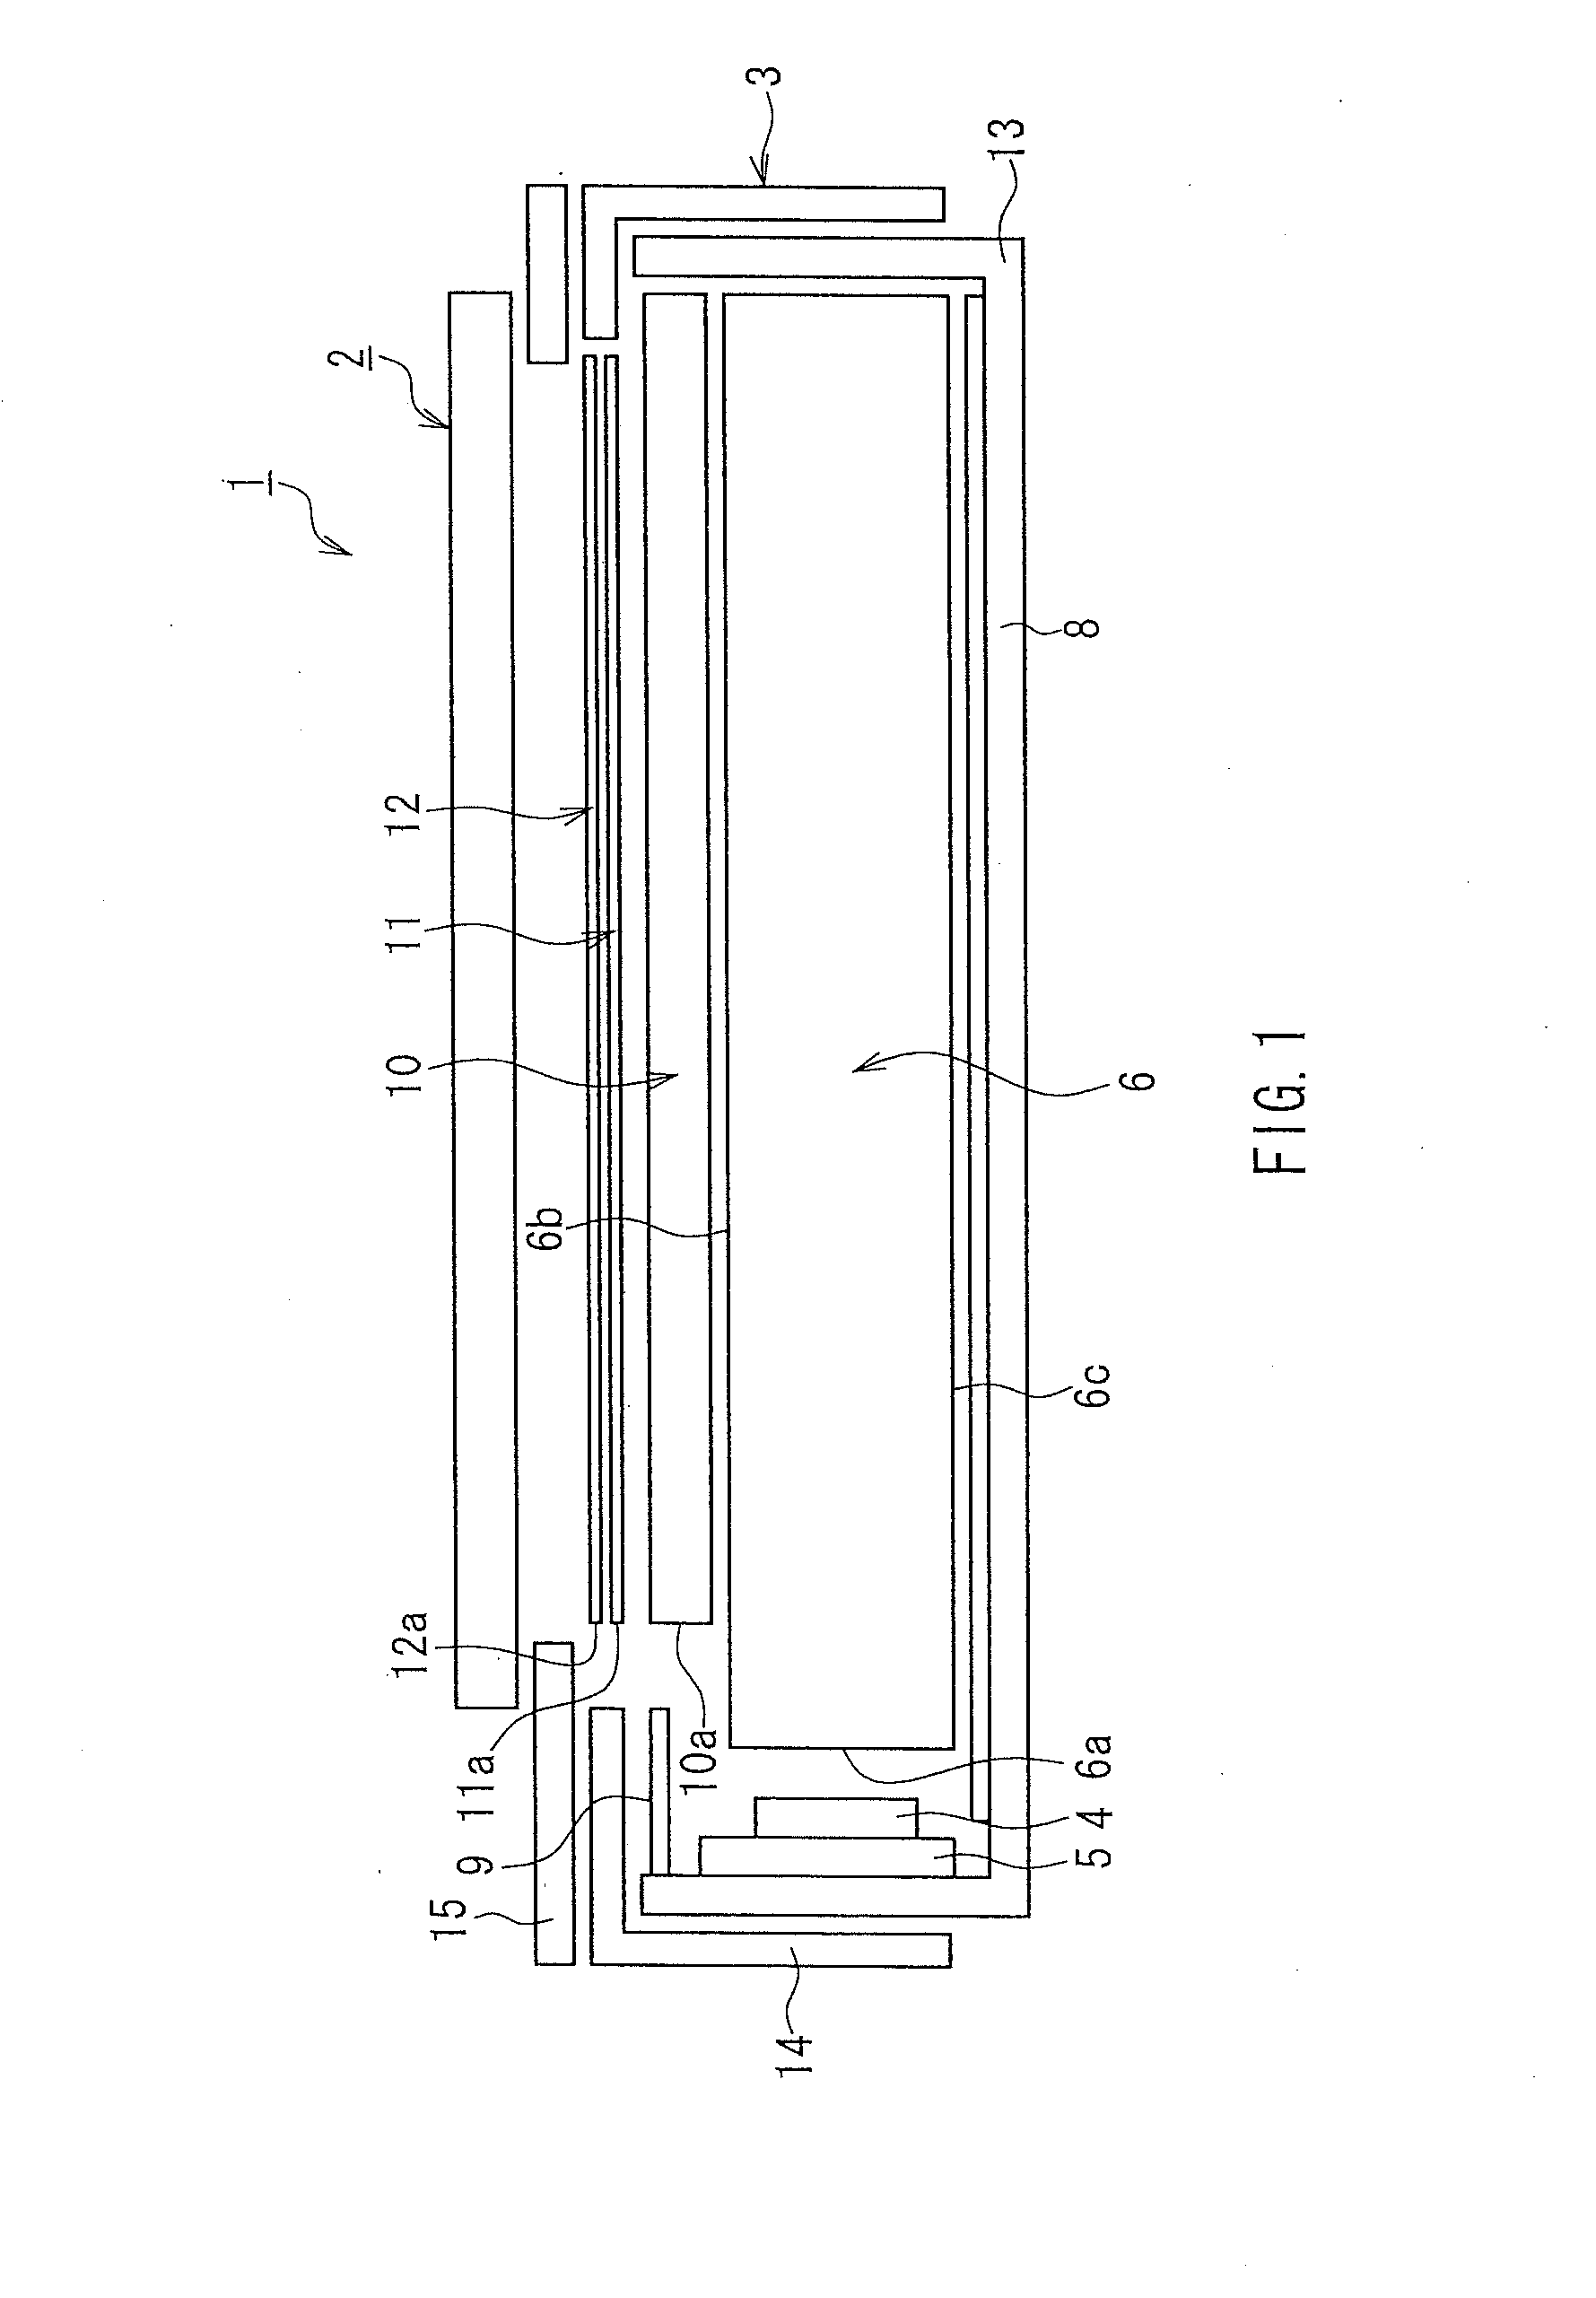 Control unit, display device including control unit, and control method